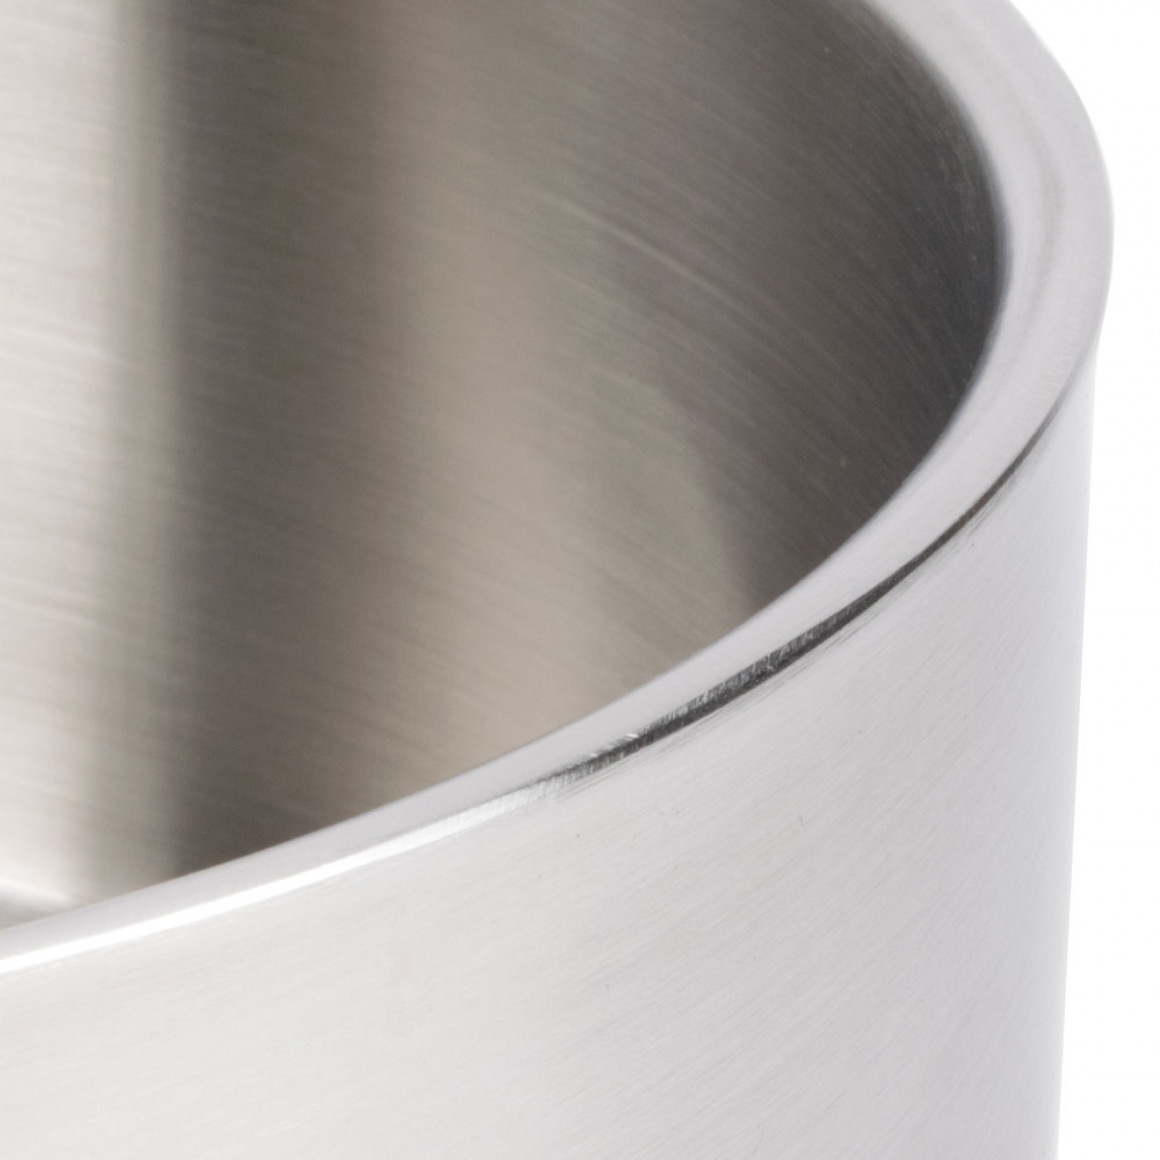 STAINLESS STEEL, SATIN BOWL, DOUBLE WALL, 156 OZ.